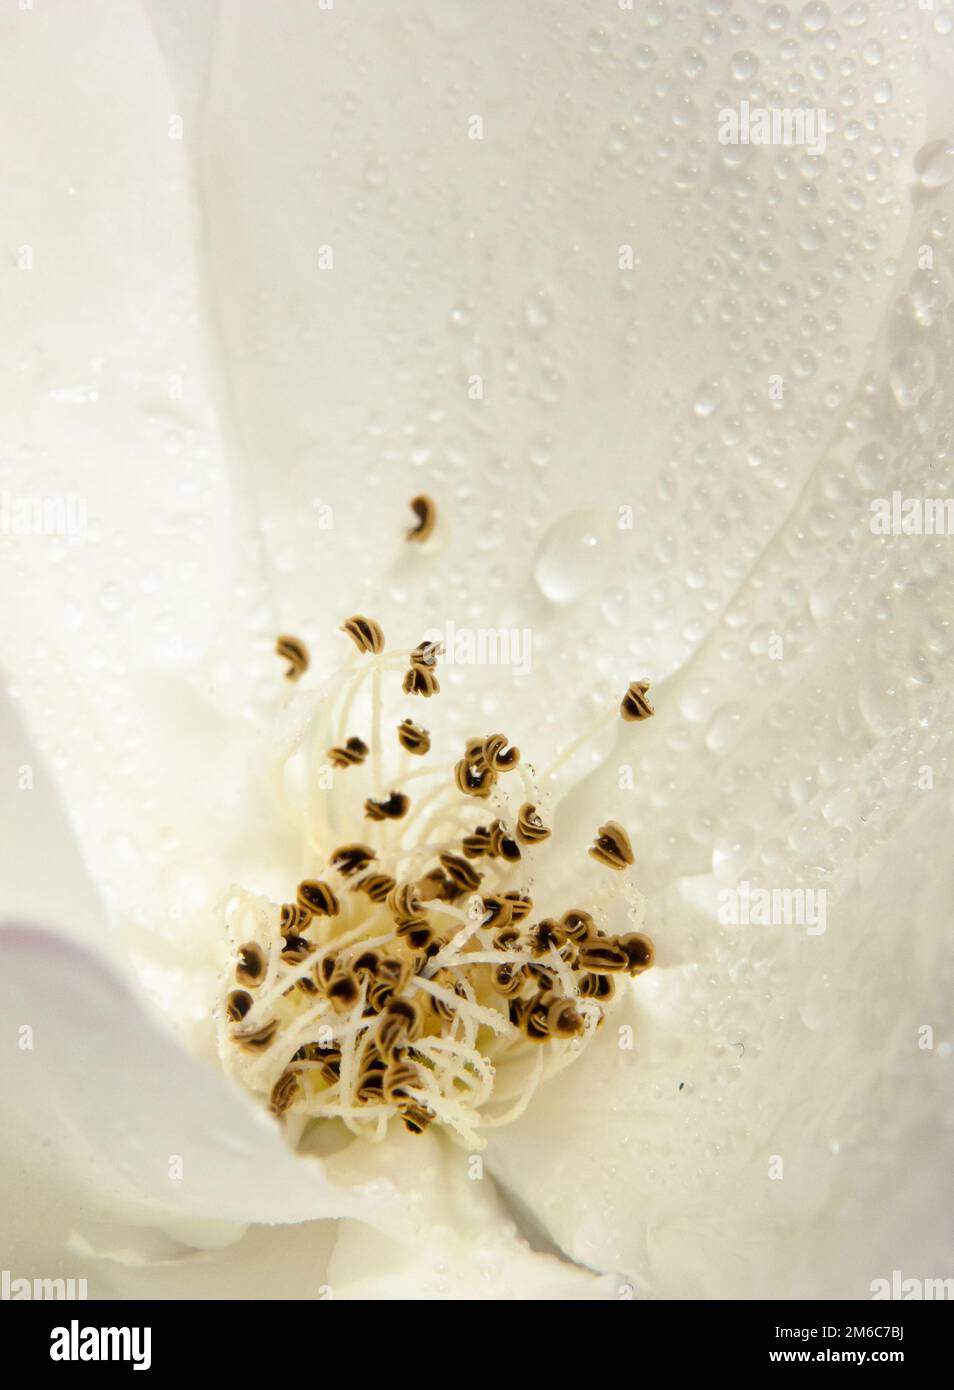 White wild rose up close with water dew droplets background Rosa canina Stock Photo